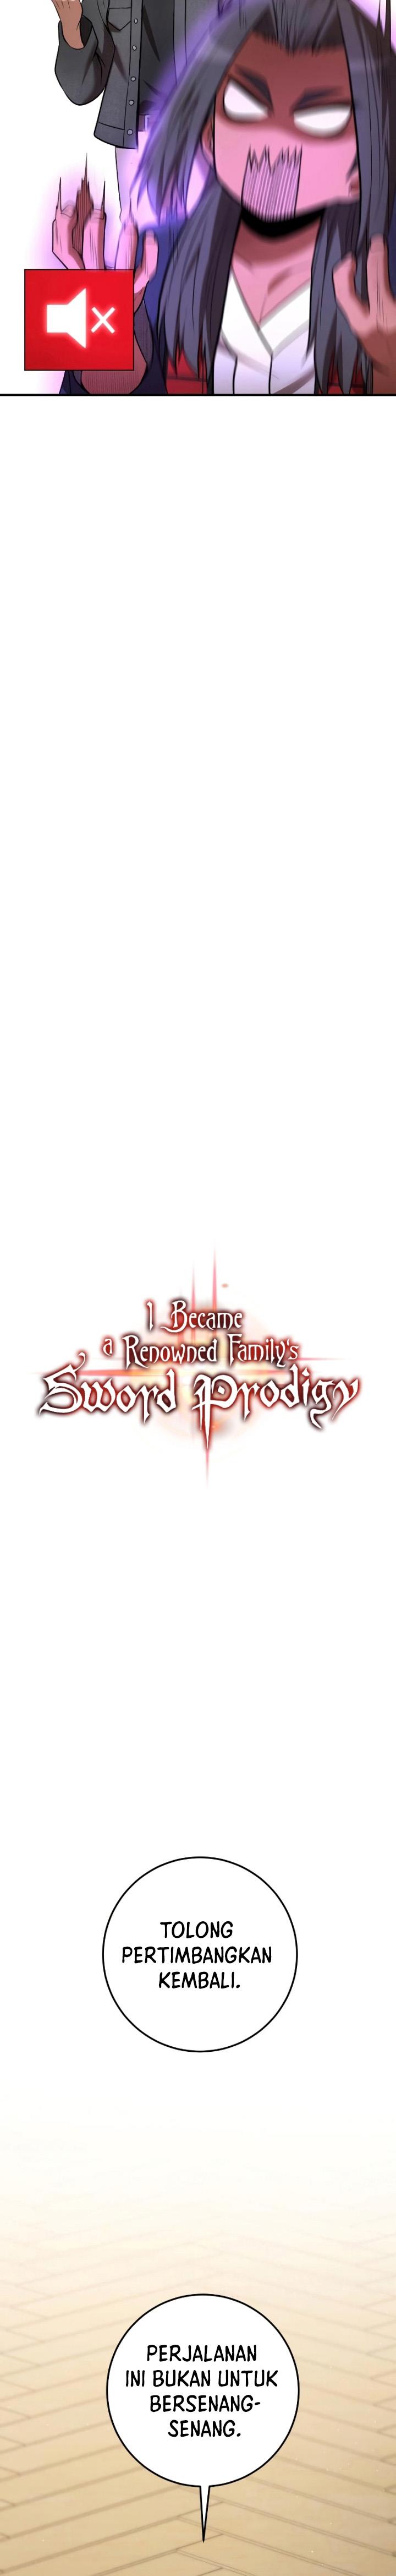 I Became a Renowned Family’s Sword Prodigy Chapter 62